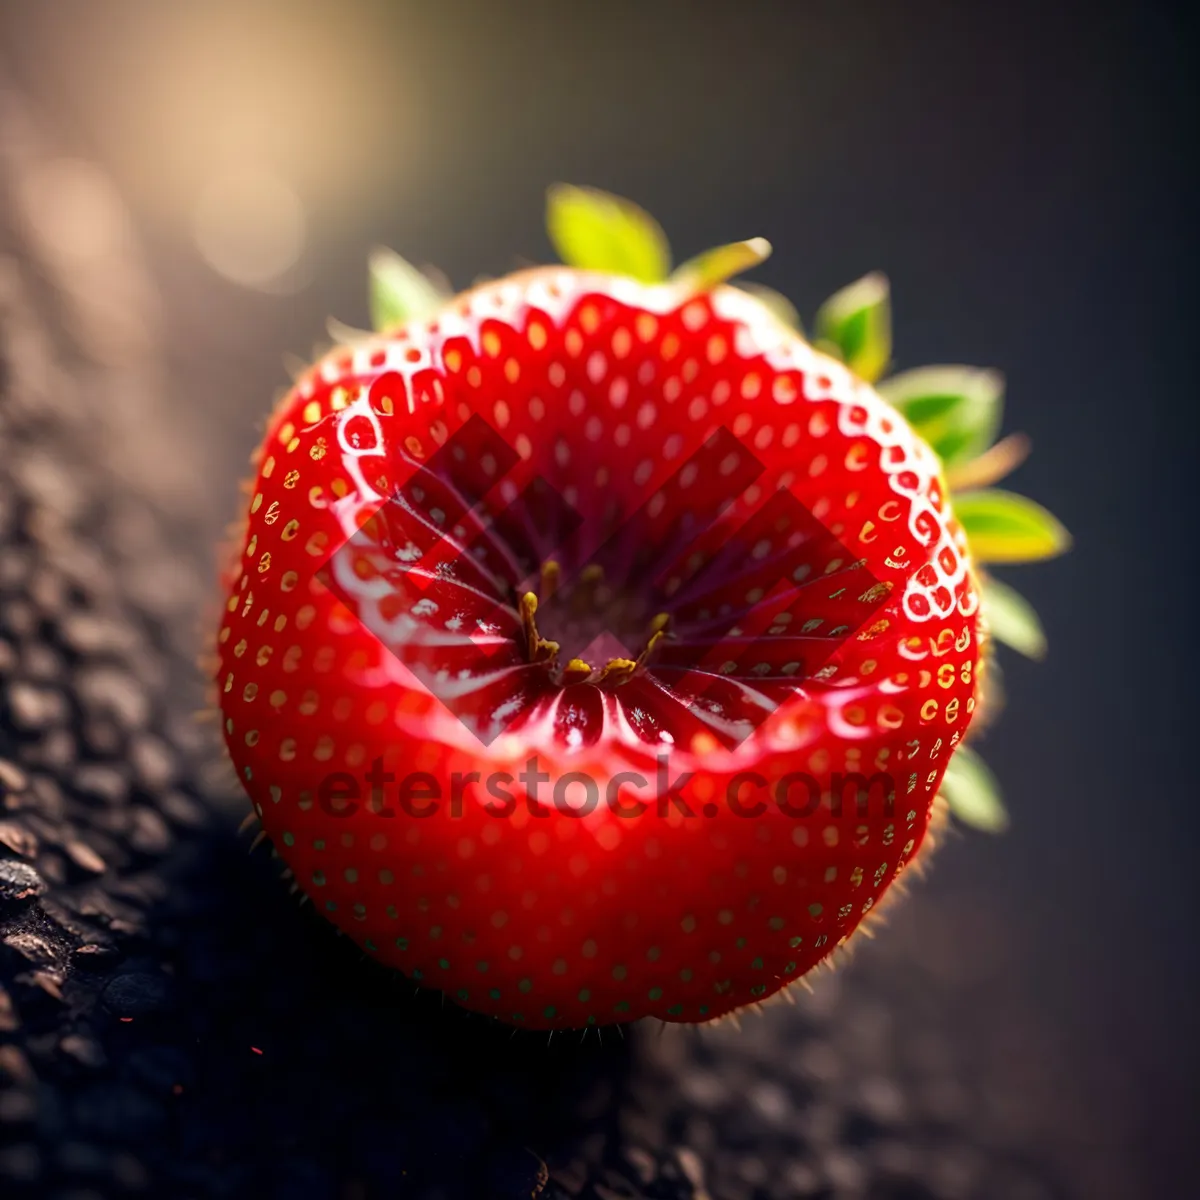 Picture of Juicy Strawberry Delight - Fresh, Ripe, and Delicious!